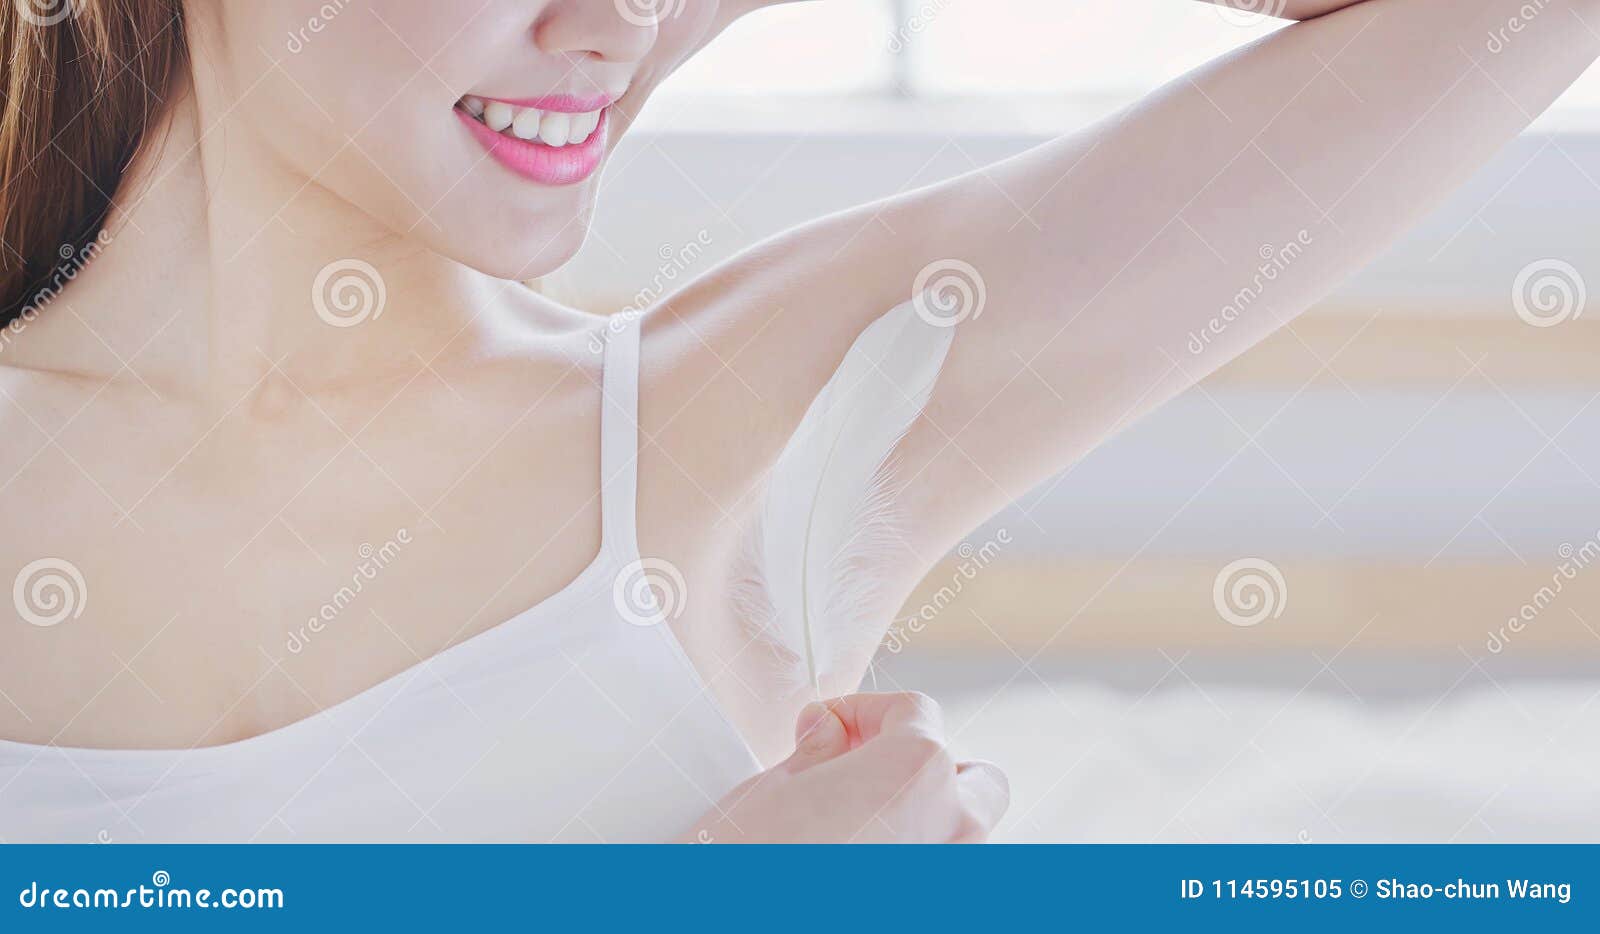 woman with clean underarm